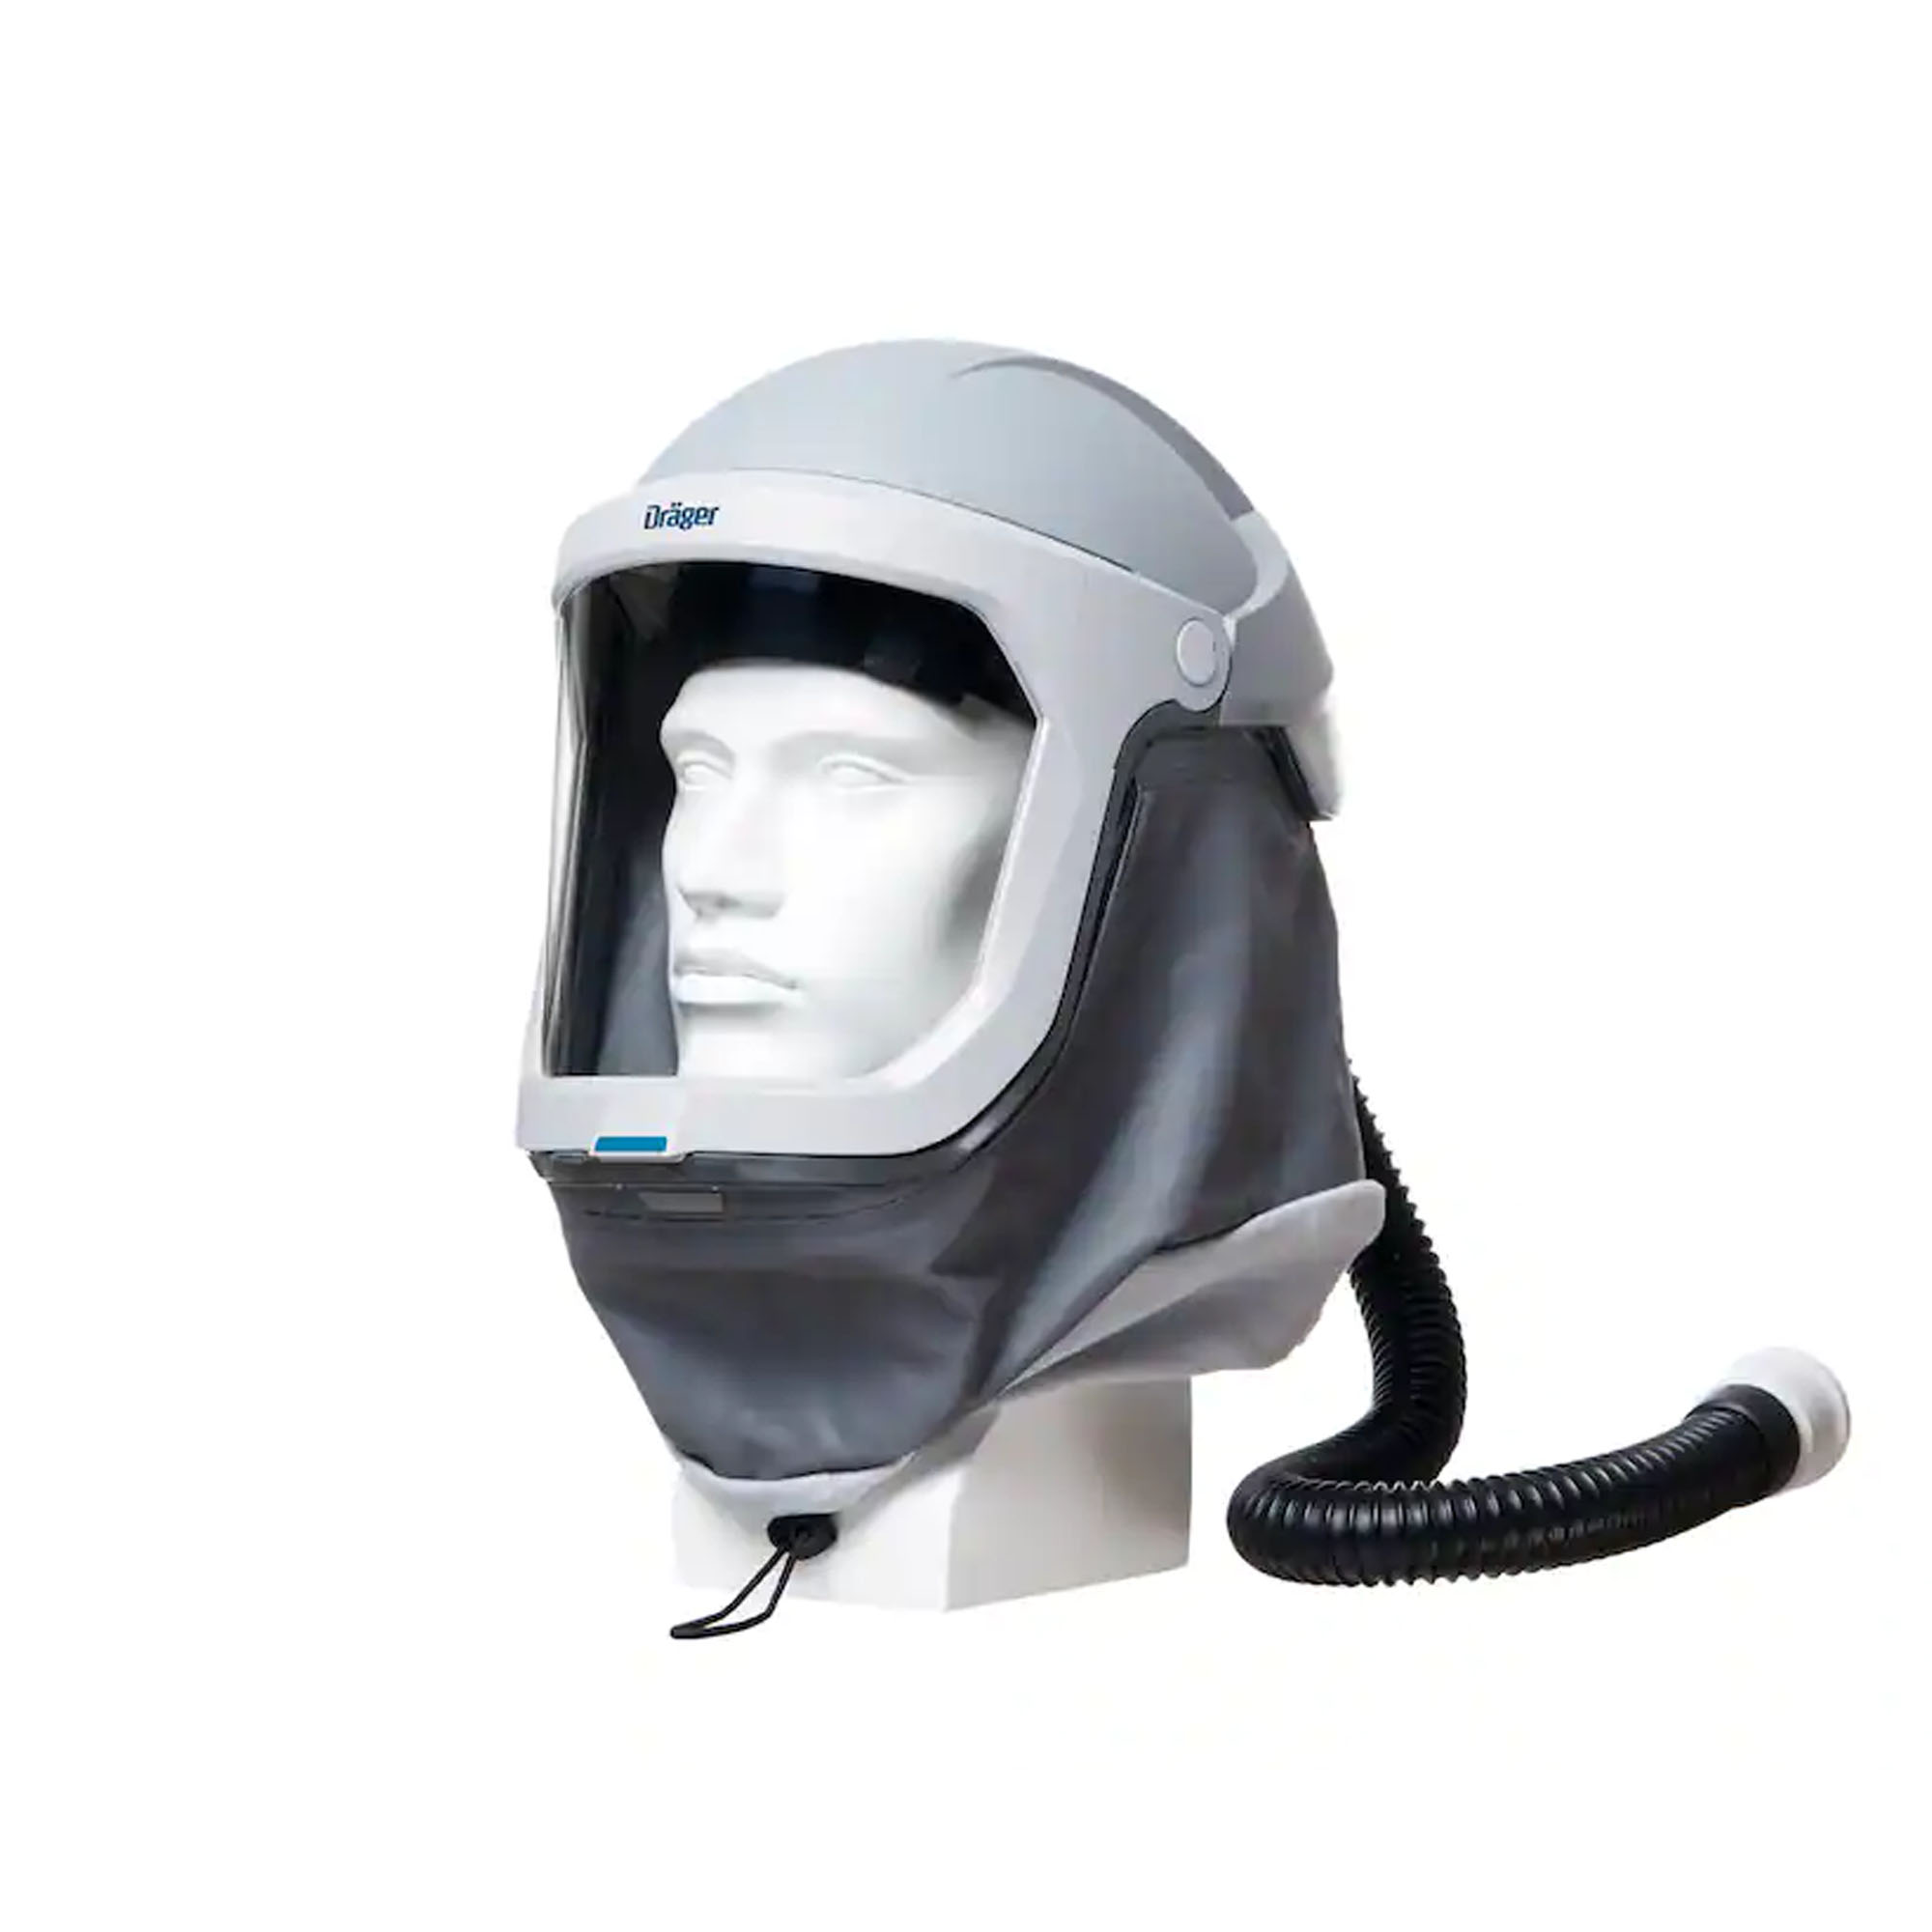 3710775 Dräger X-plore&reg; 8000 Helmets ​Dräger X-plore&reg; 8000 helmets provide effective mechanical head protection combined with maximum comfort. Regardless of whether you are dependent on ambient air or working independently, the helmets are an integral part of our Dräger X-plore&reg; 8000 powered air-purifying respirator systems and Dräger X-plore&reg; 9300 compressed air line device.